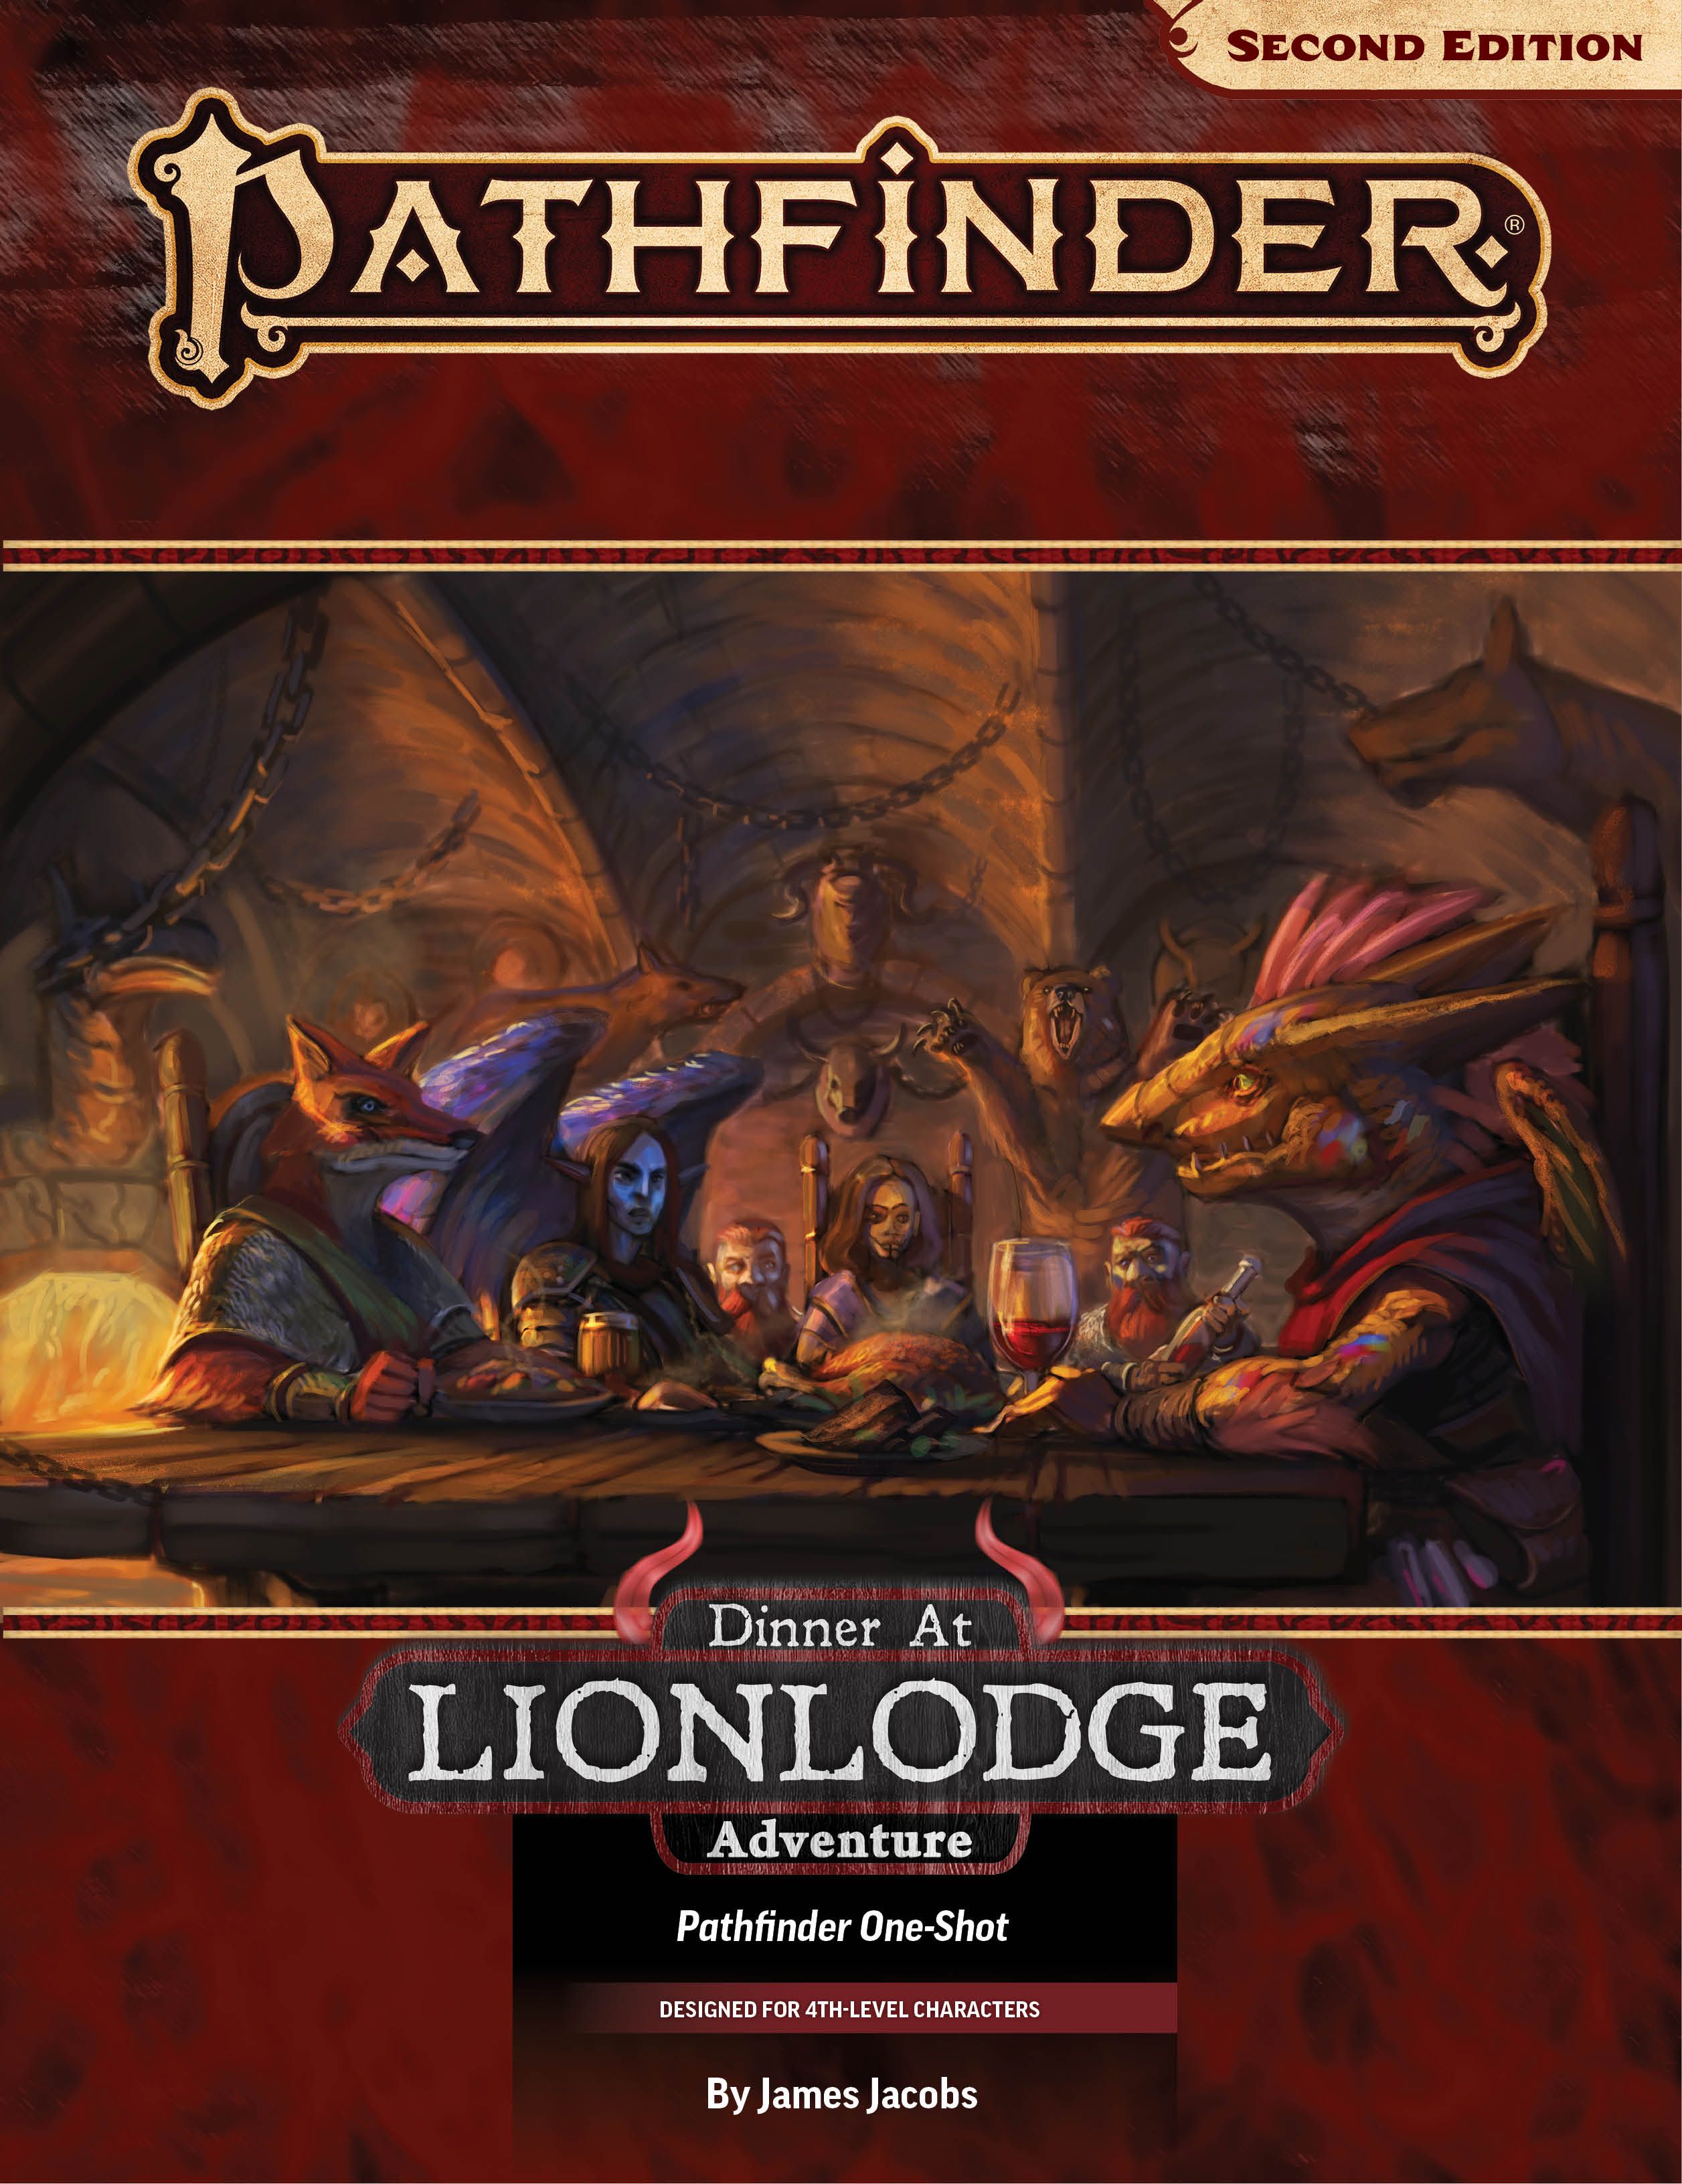 Pathfinder One-Shot: Dinner at Lionlodge featuring a warmly lit hall with a number of player characters sitting around a set table